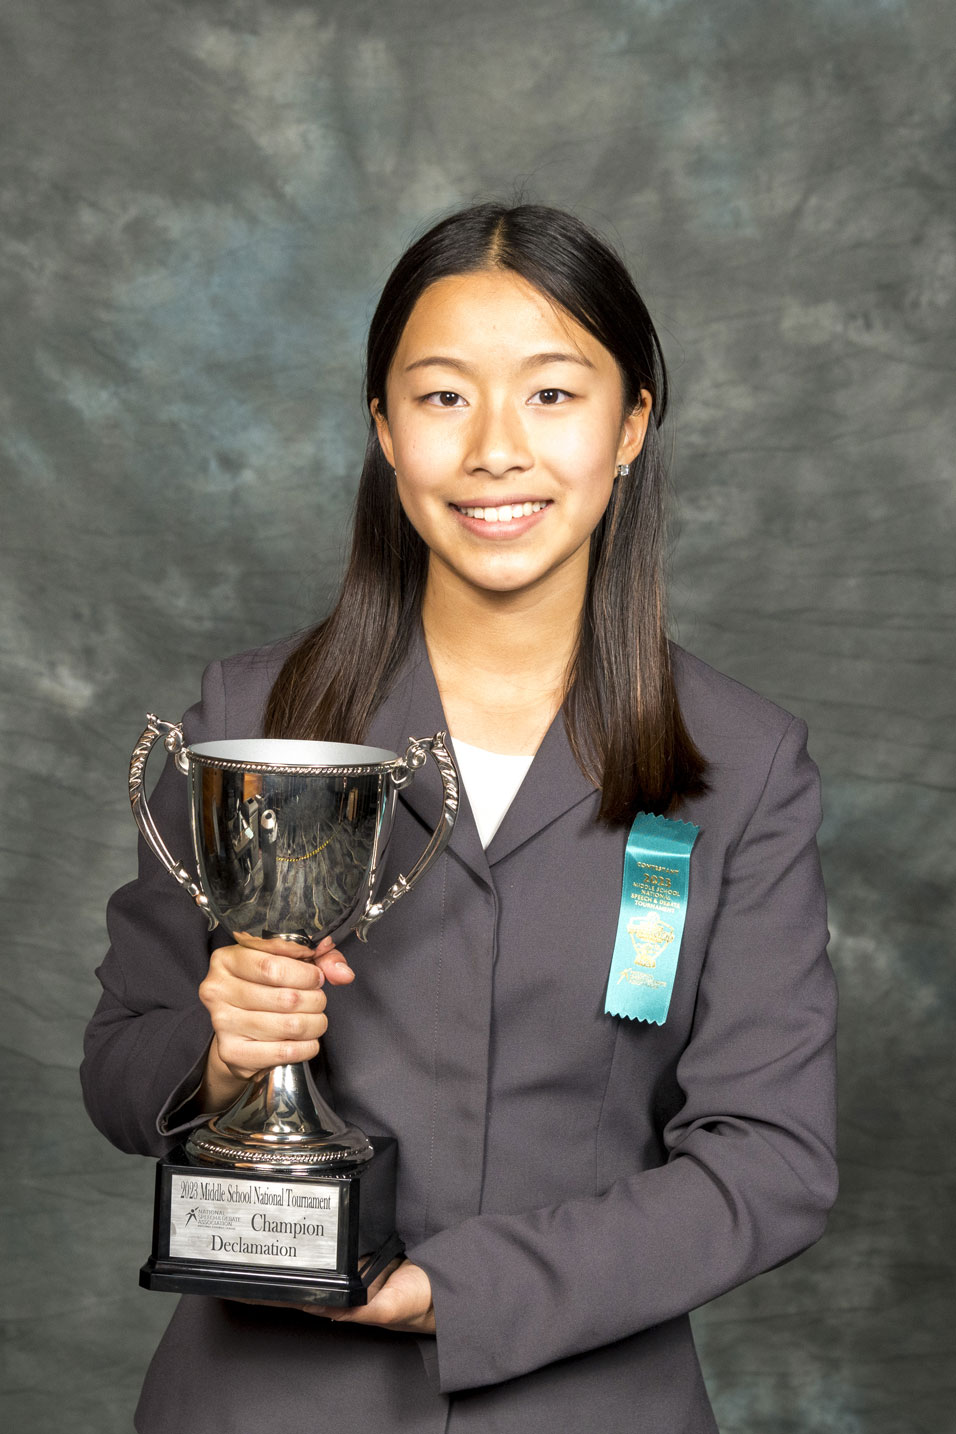 Natalie Chen from The King’s Academy Middle School in California<br />
Coached by Ricardo Velasquez